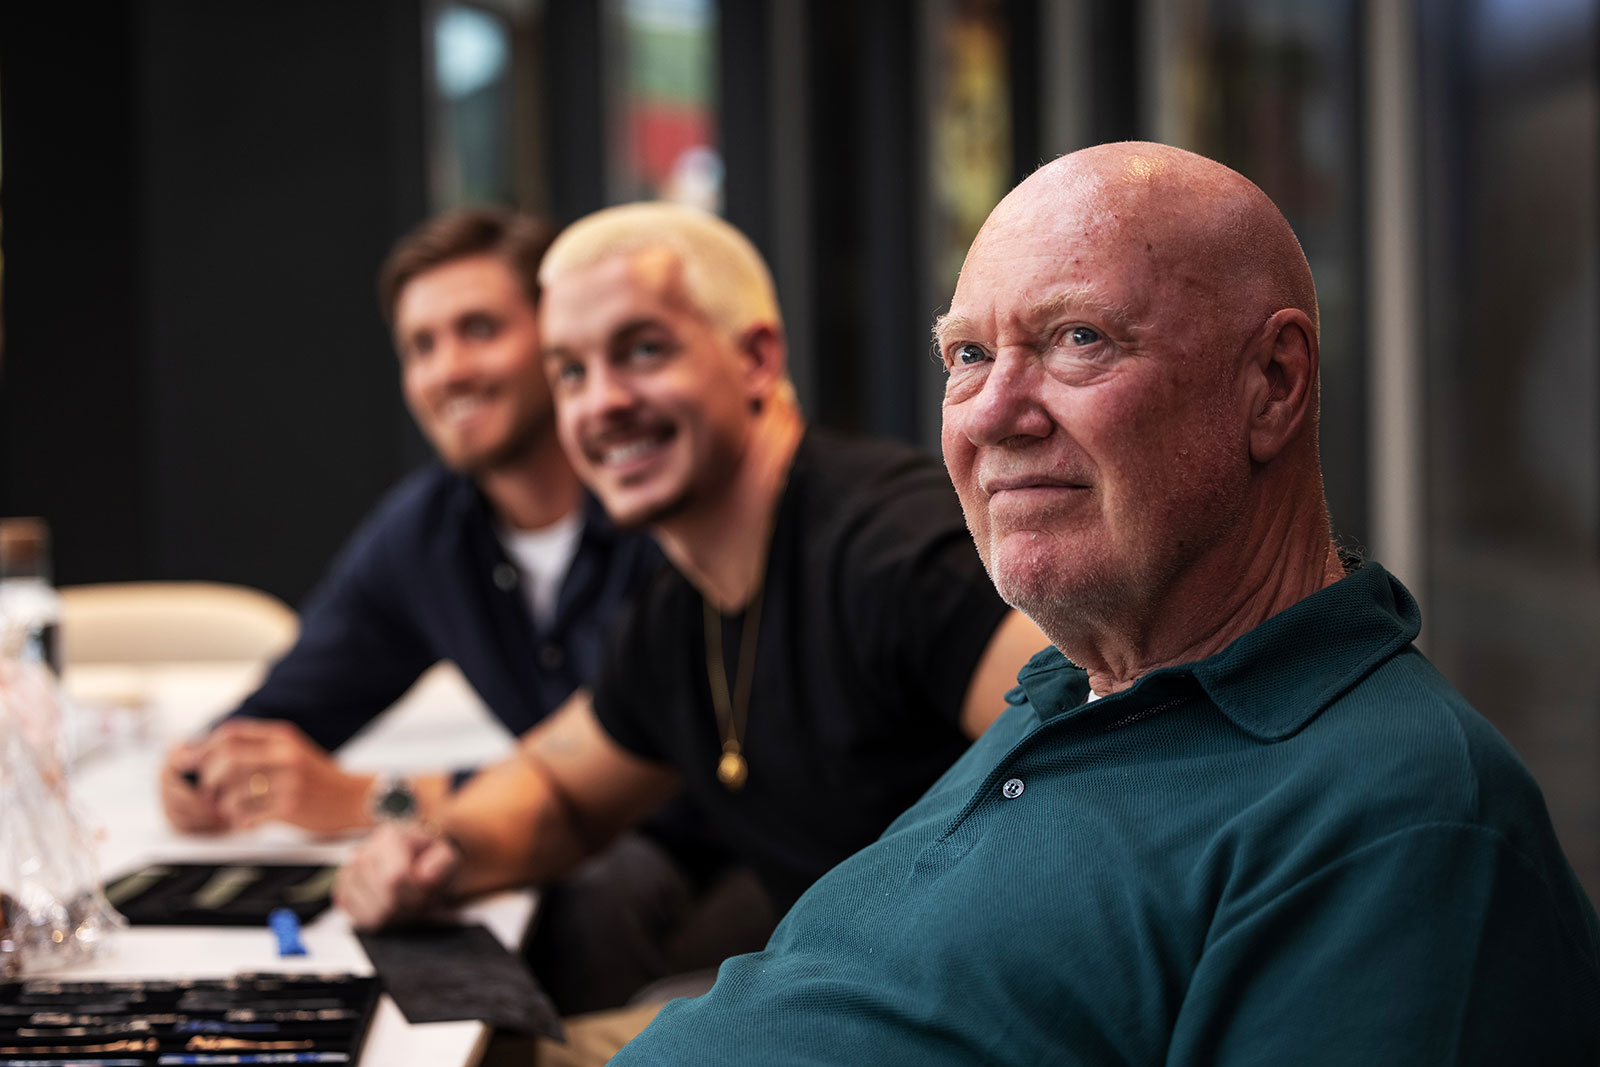 Jean-Claude Biver, Head of Watchmaking of LVMH, talks business